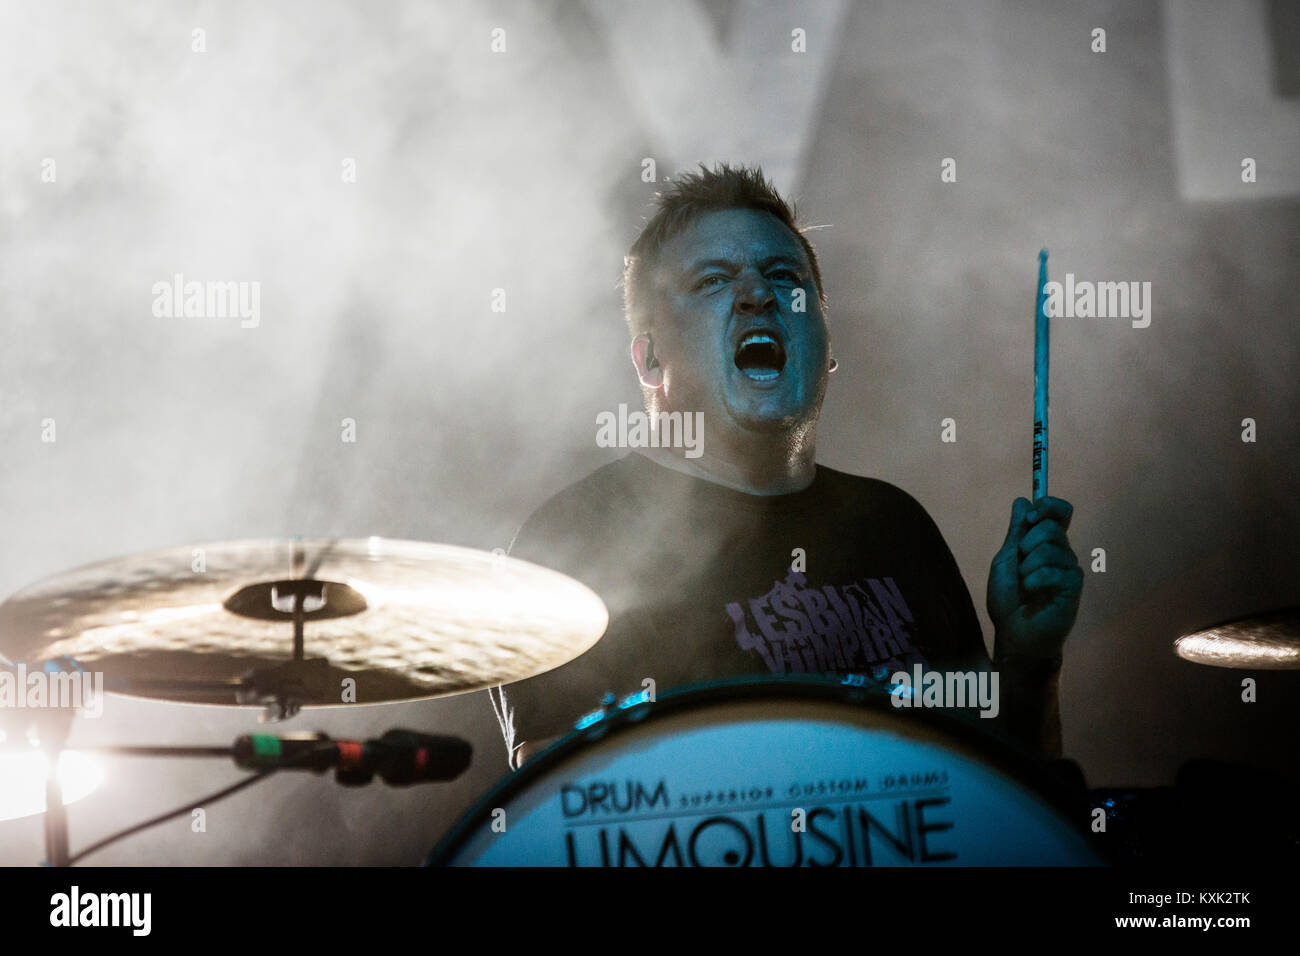 Musician and drummer Mads Hasager pictured live on stage behind his drum kit at a Veto gig at Skanderborg Festival 2013. Denmark 2013. Stock Photo